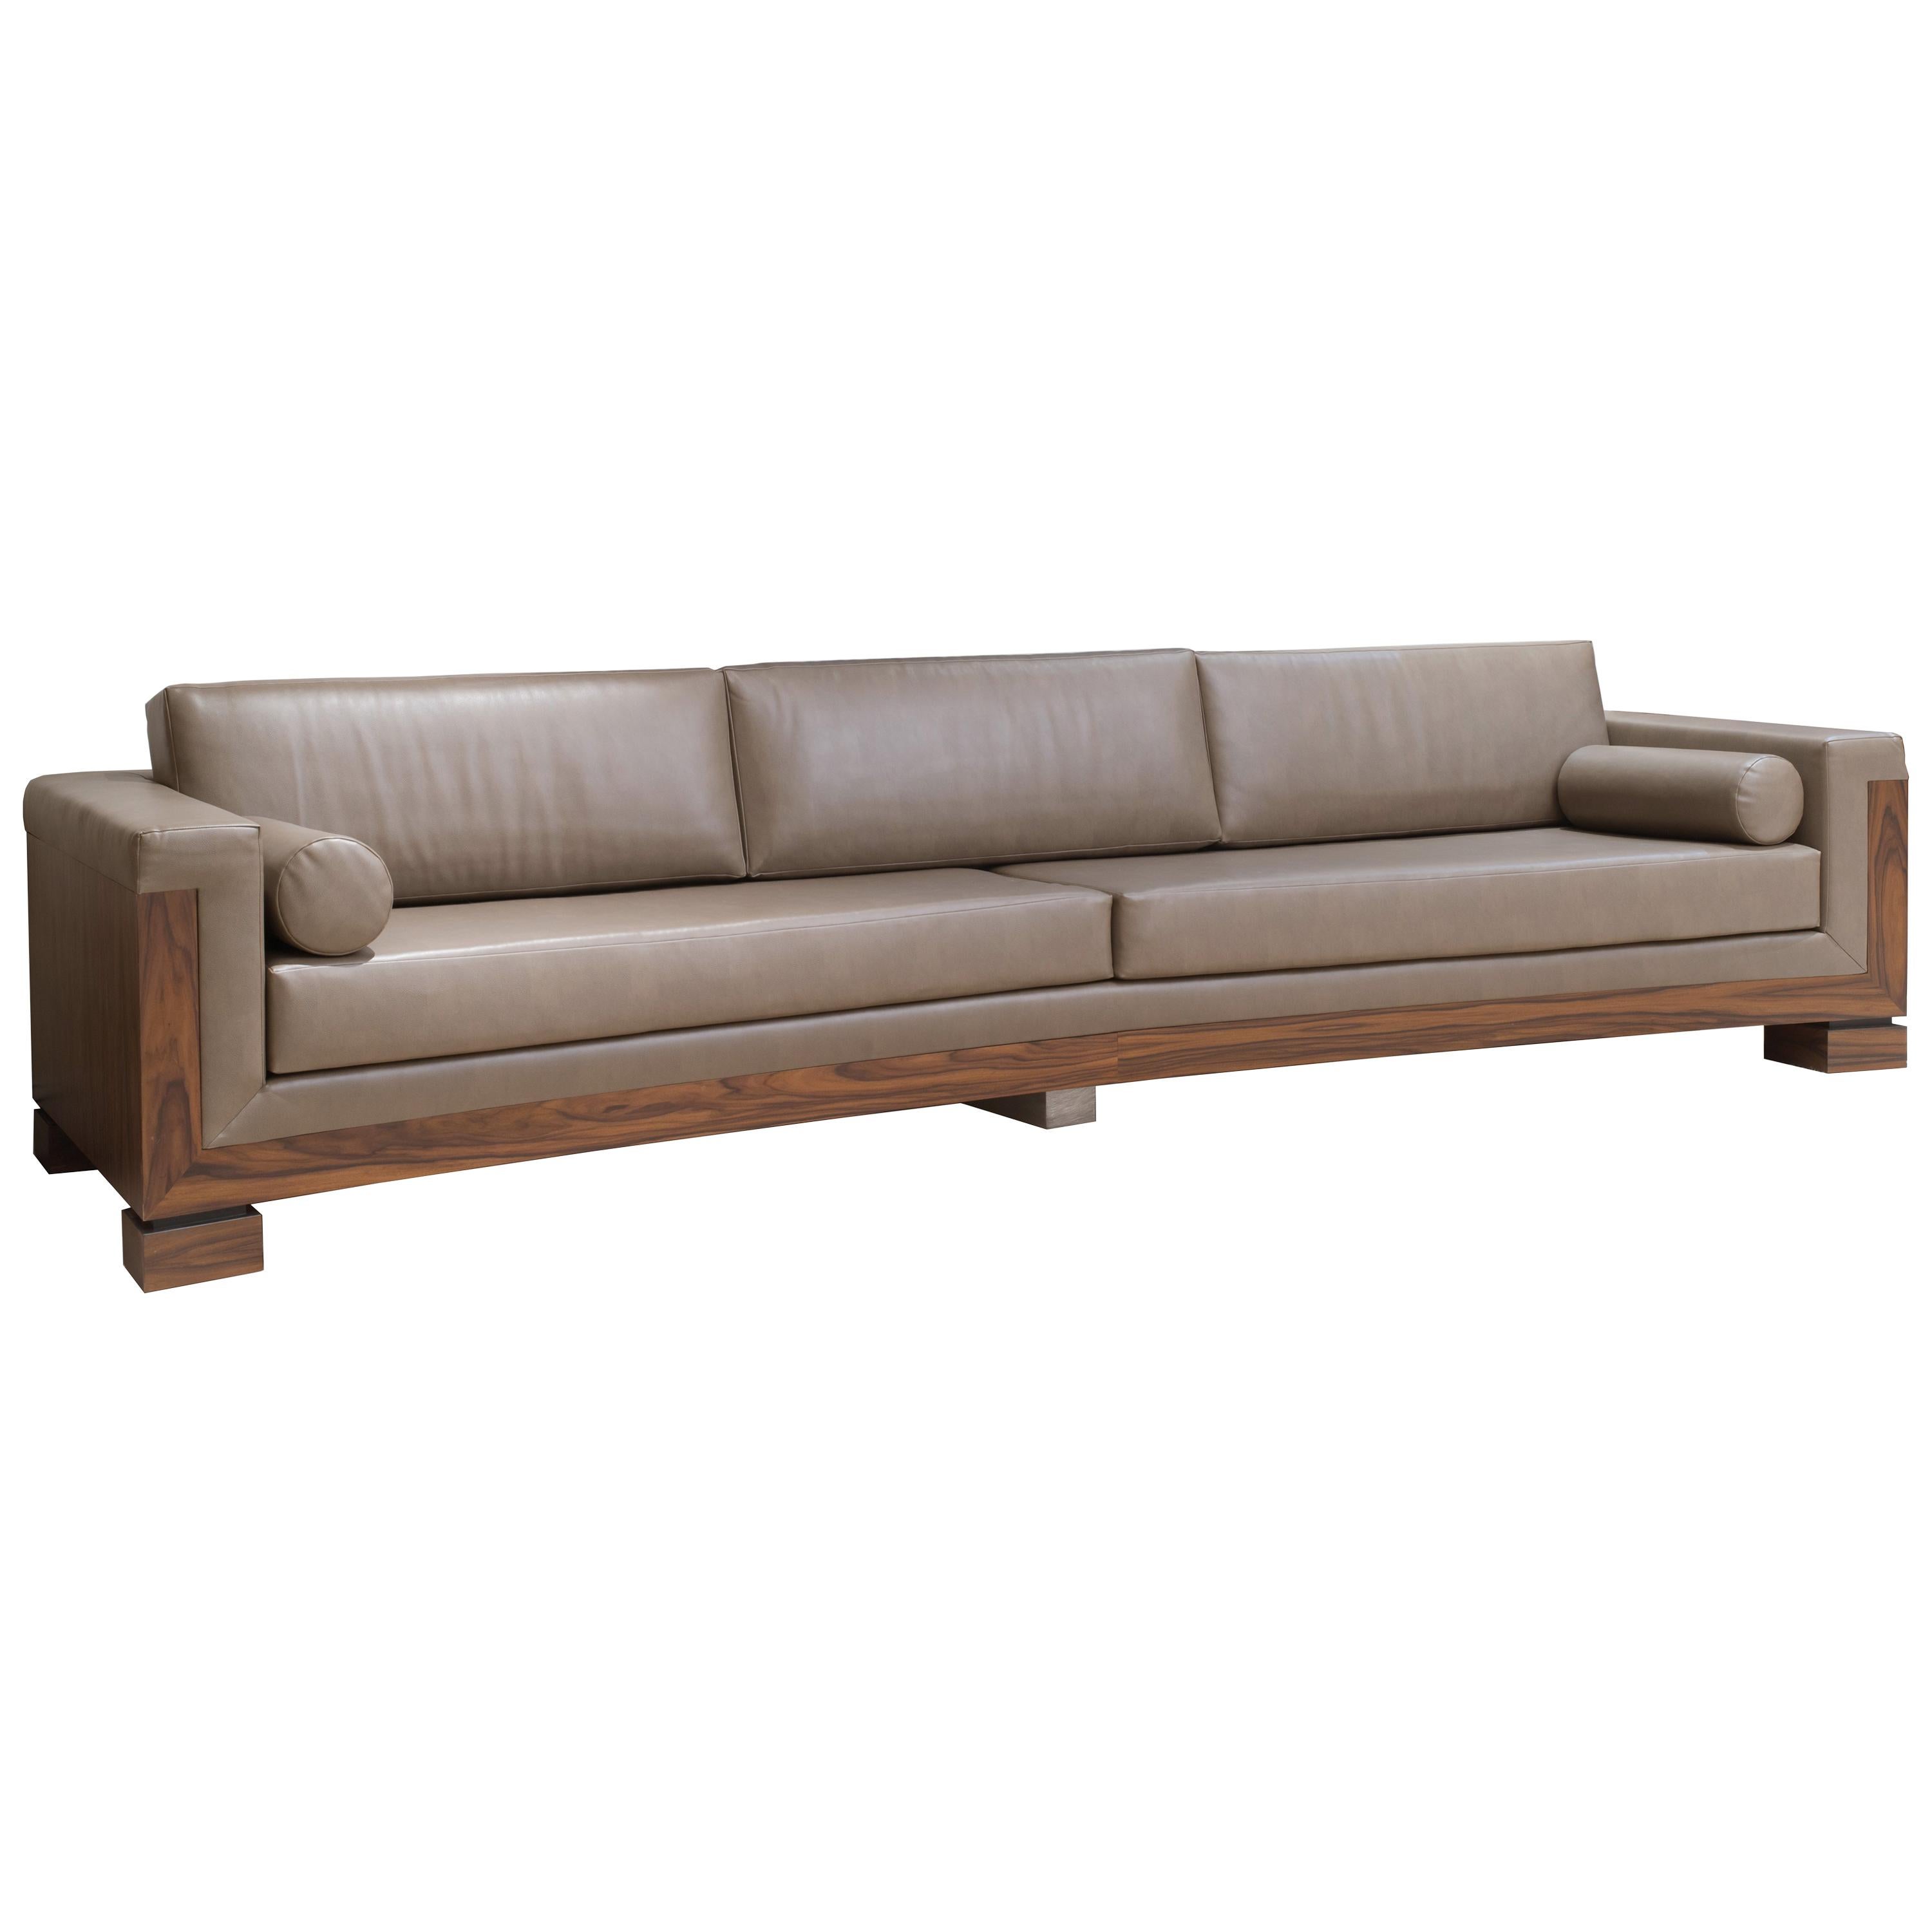 Contemporary Extra Long Taupe Leather, Extra Long Tufted Leather Sofa